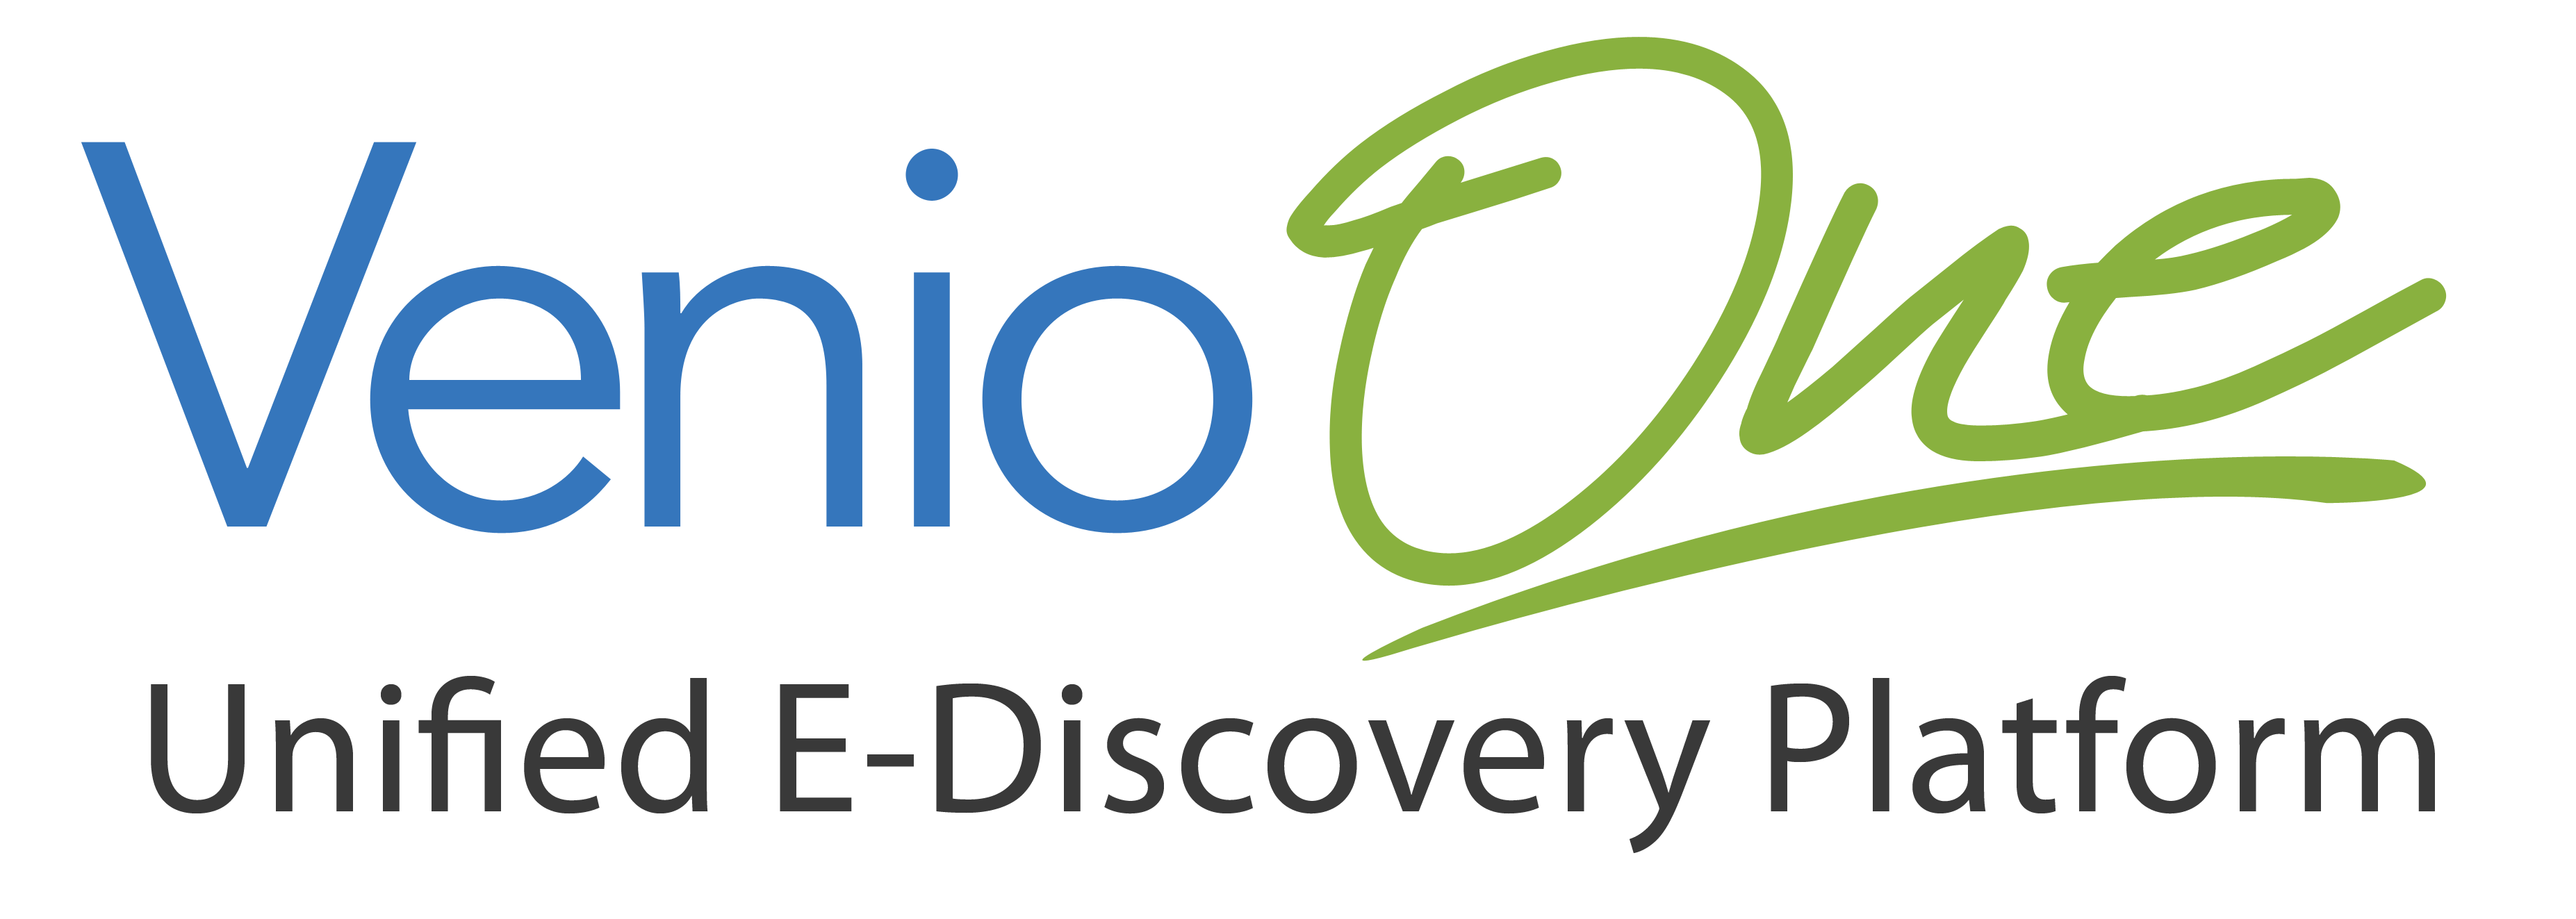 VenioOne Unified E-Discovery Platform from Venio Systems